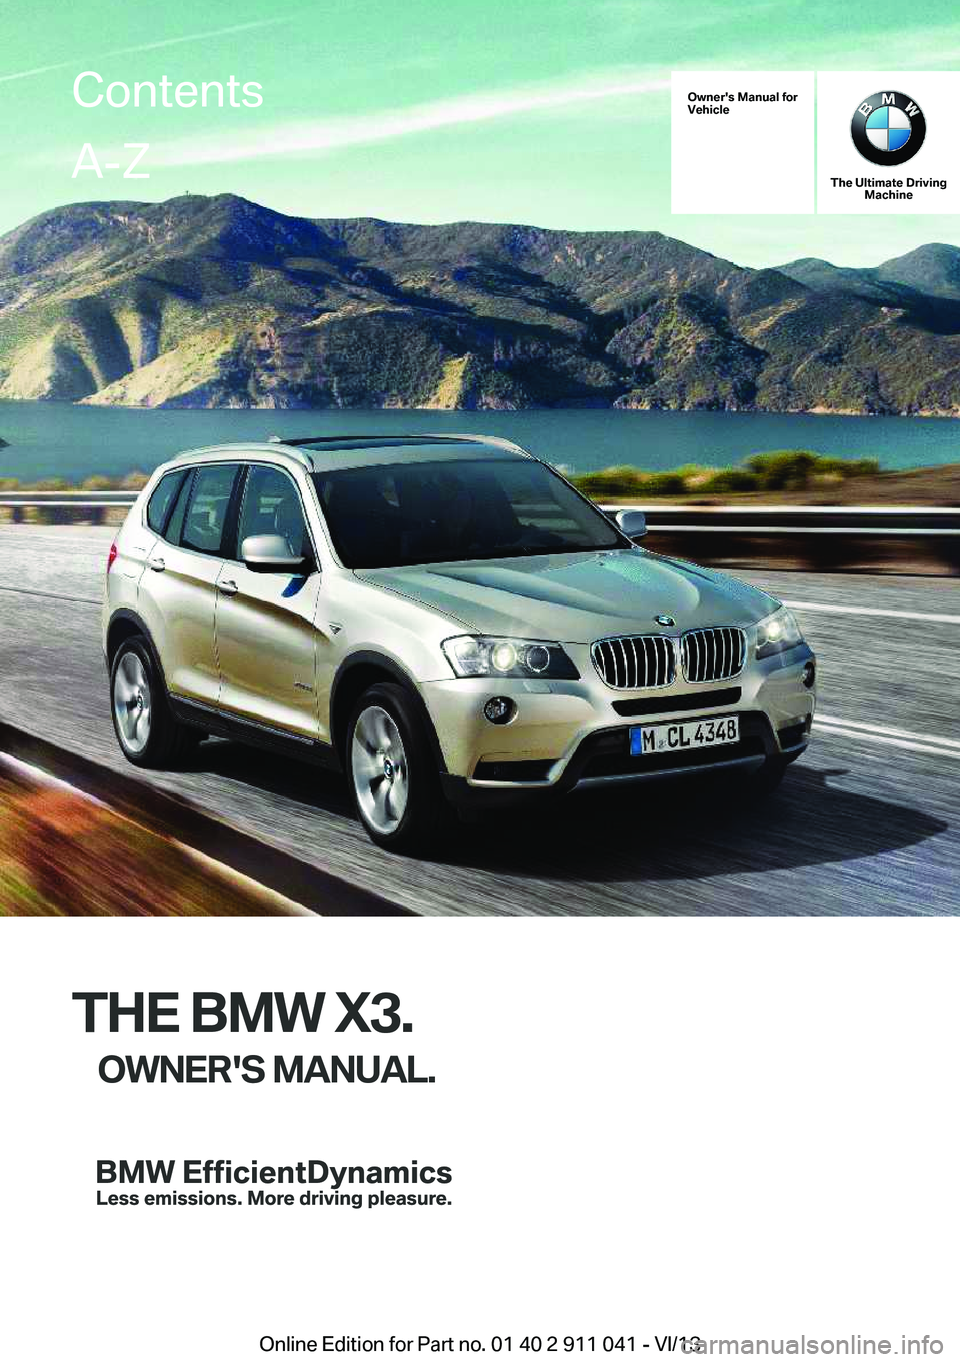 BMW X3 XDRIVE 28I 2014  Owners Manual Owner's Manual for
Vehicle
The Ultimate Driving Machine
THE BMW X3.
OWNER'S MANUAL.
ContentsA-Z
Online Edition for Part no. 01 40 2 911 041 - VI/13   